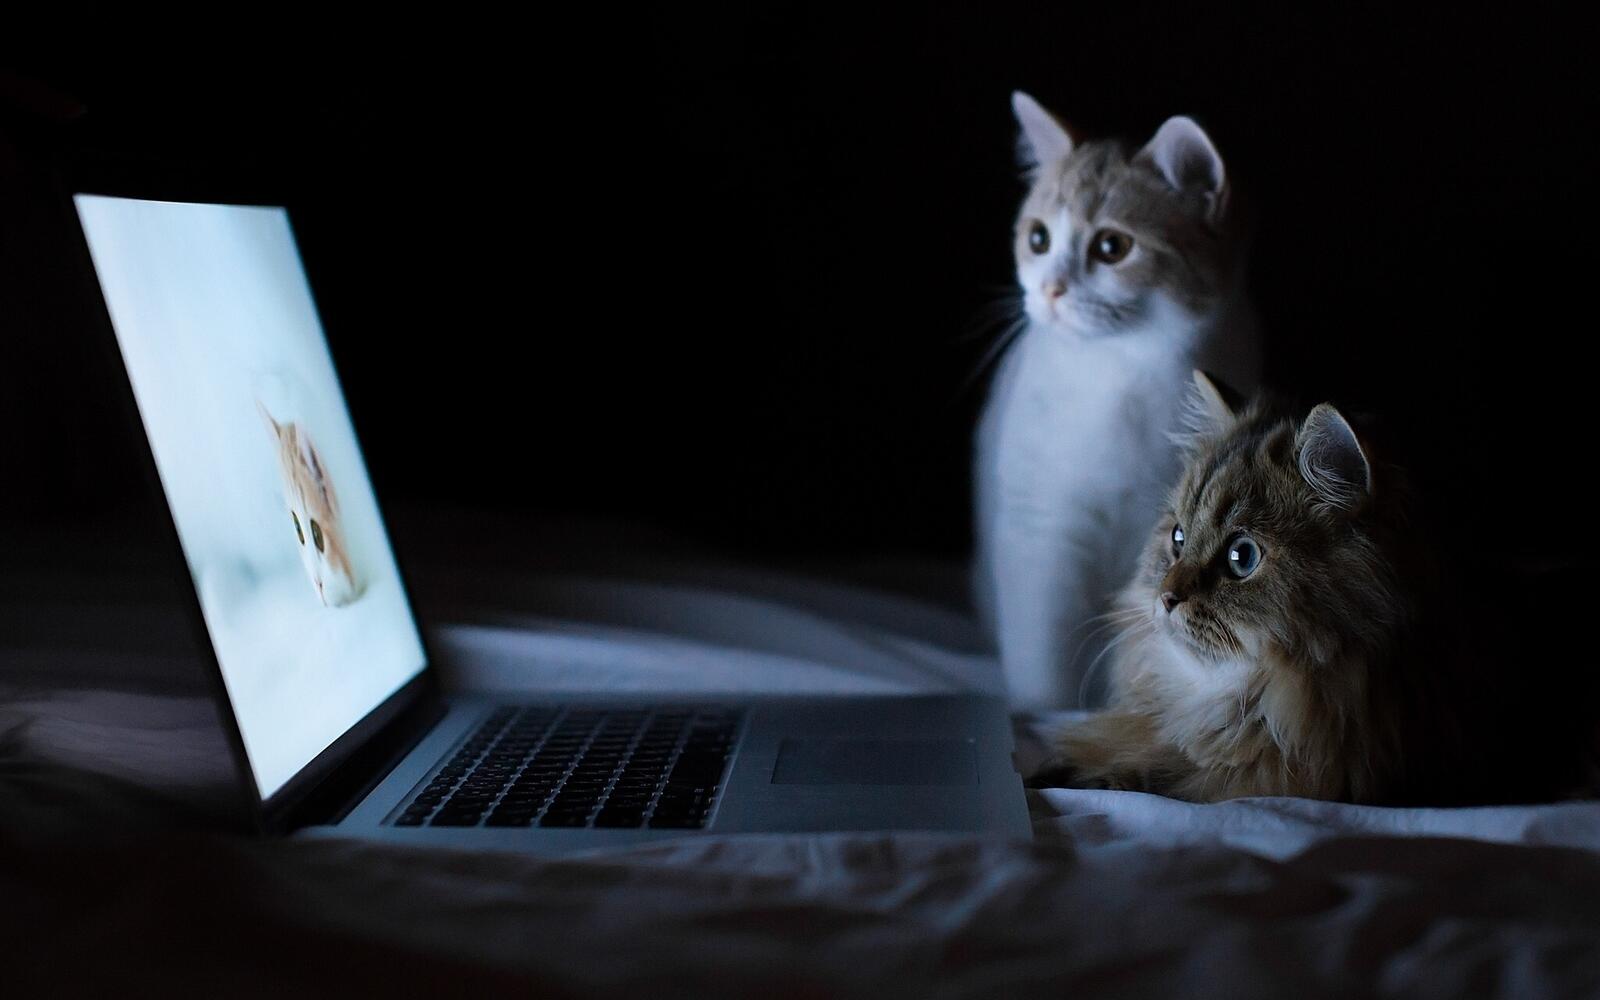 Wallpapers animals cats computers on the desktop